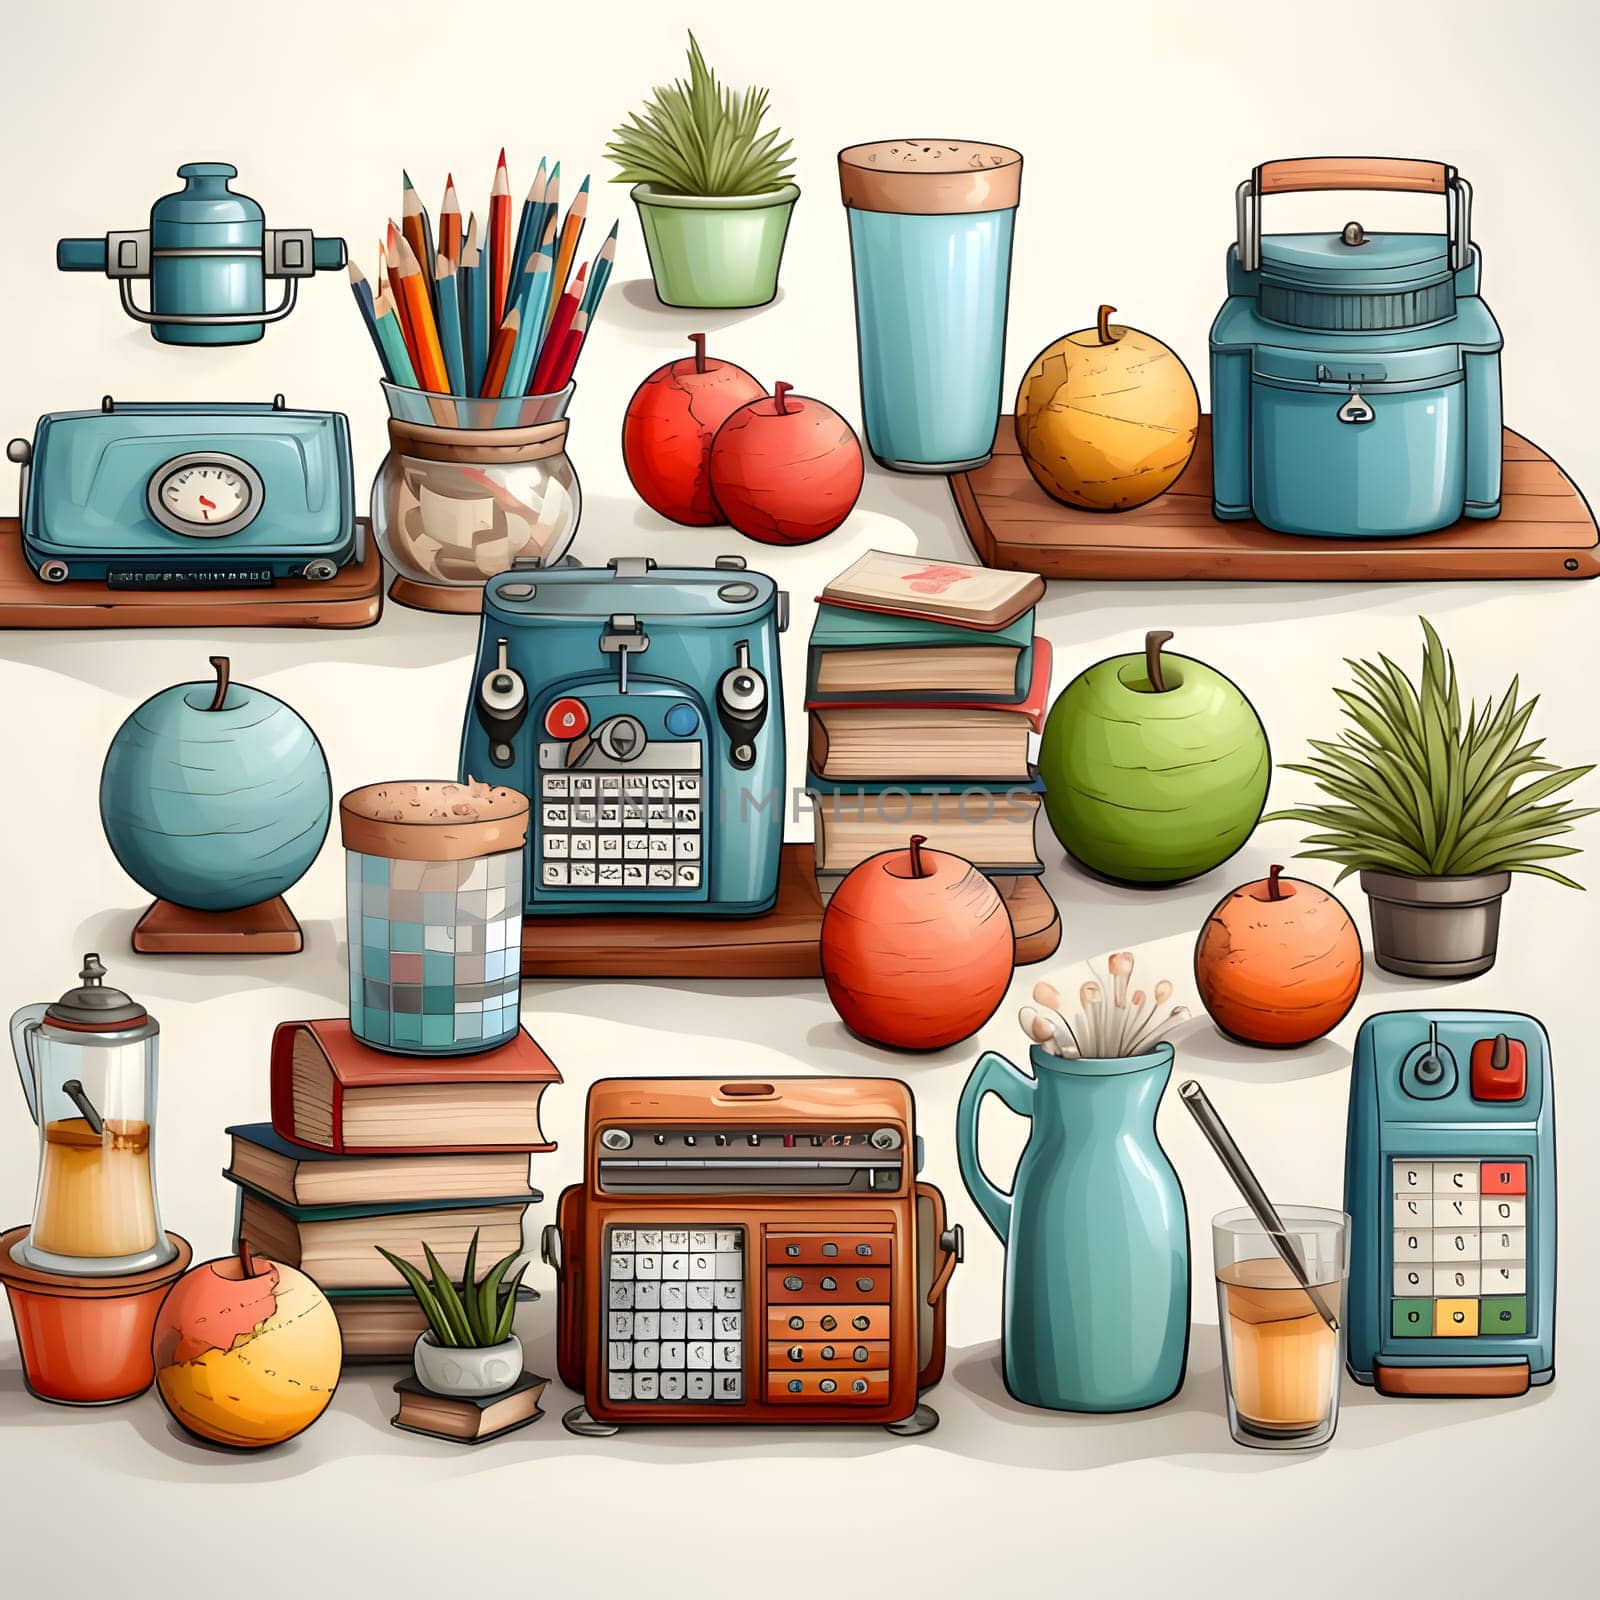 Patterns and banners backgrounds: Illustration of different office tools and objects on a white background.